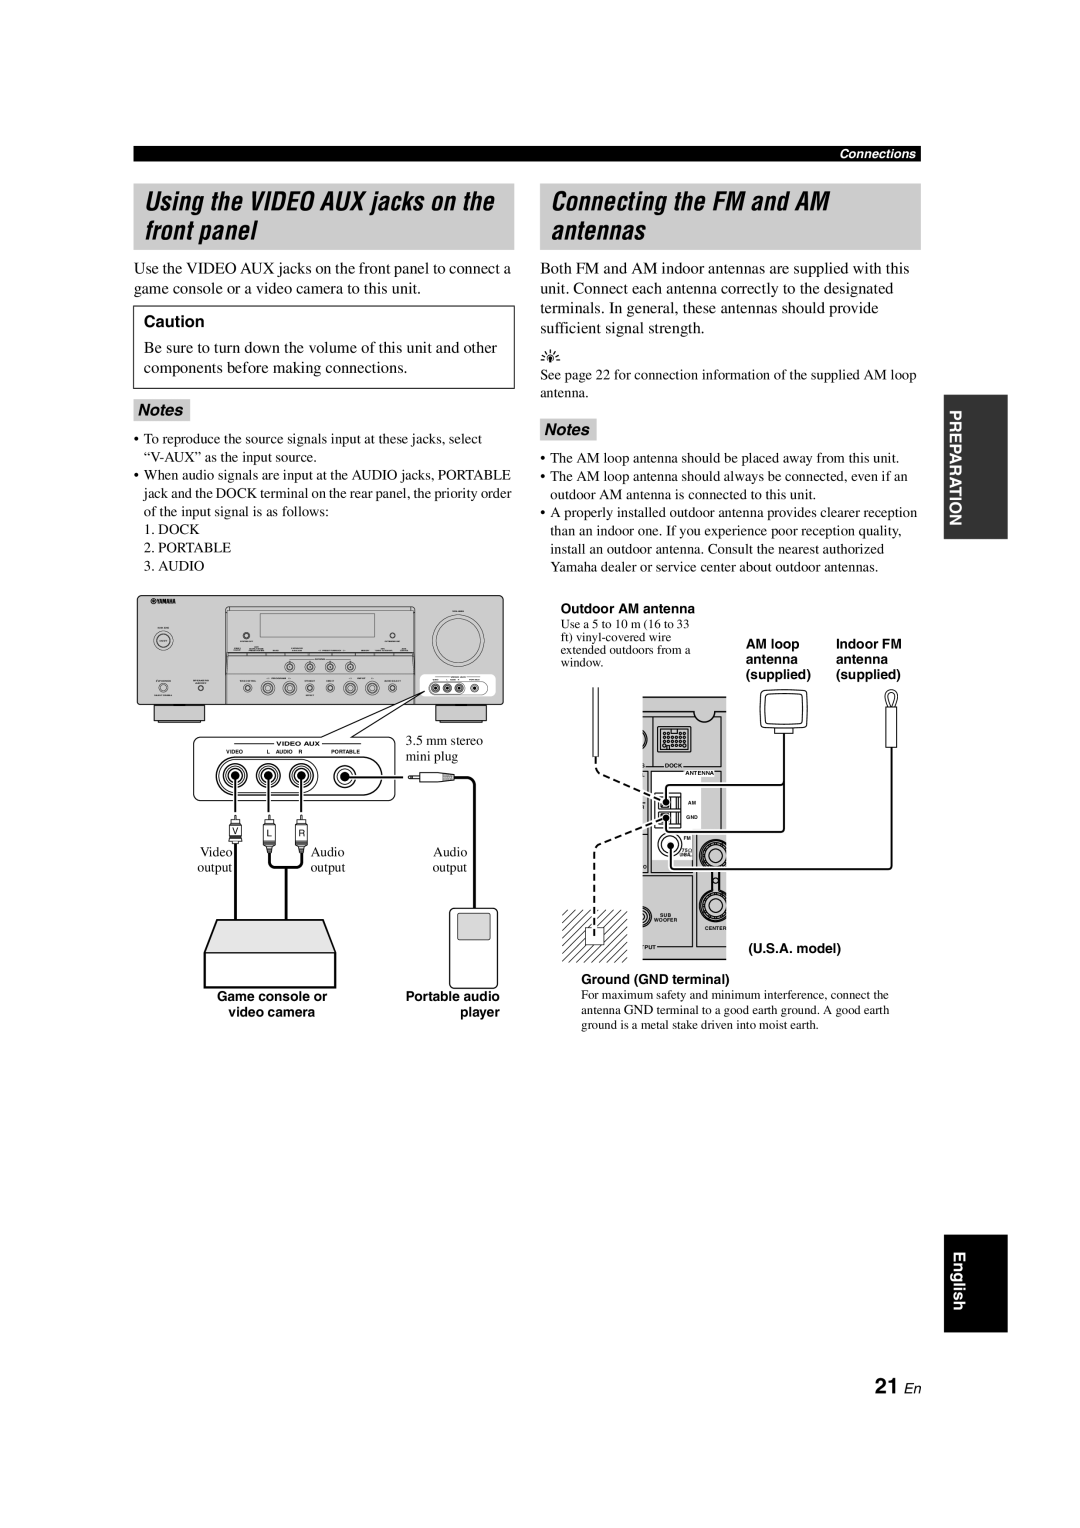 Yamaha HTR-6150 owner manual Using the VIDEO AUX jacks on the front panel, Connecting the FM and AM antennas, 21 En, Notes 